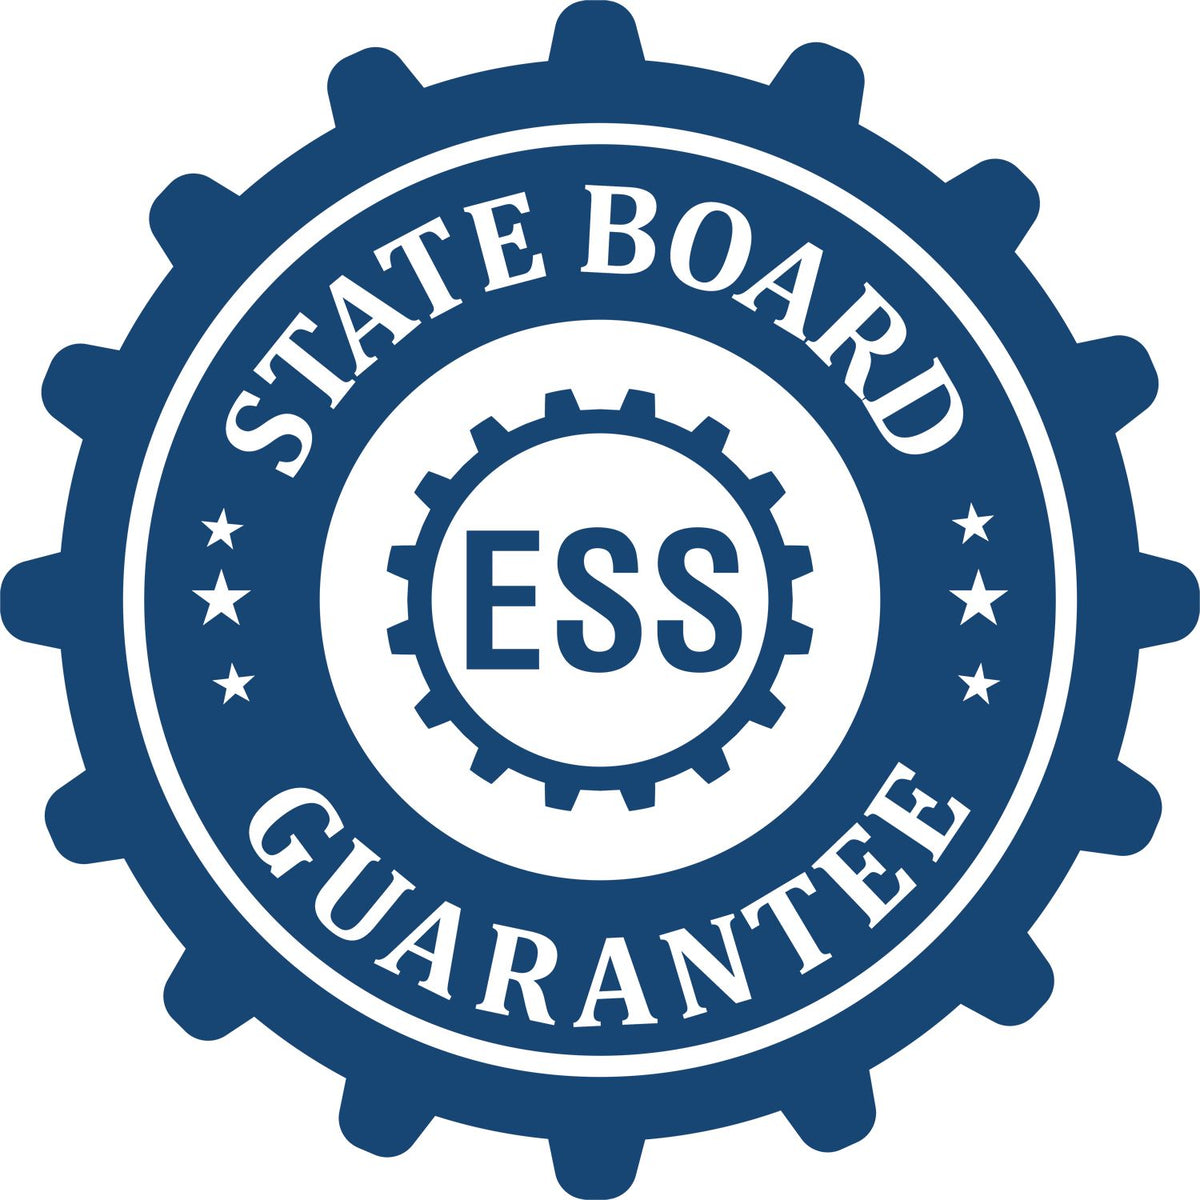 An emblem in a gear shape illustrating a state board guarantee for the Extended Long Reach Alaska Surveyor Embosser product.